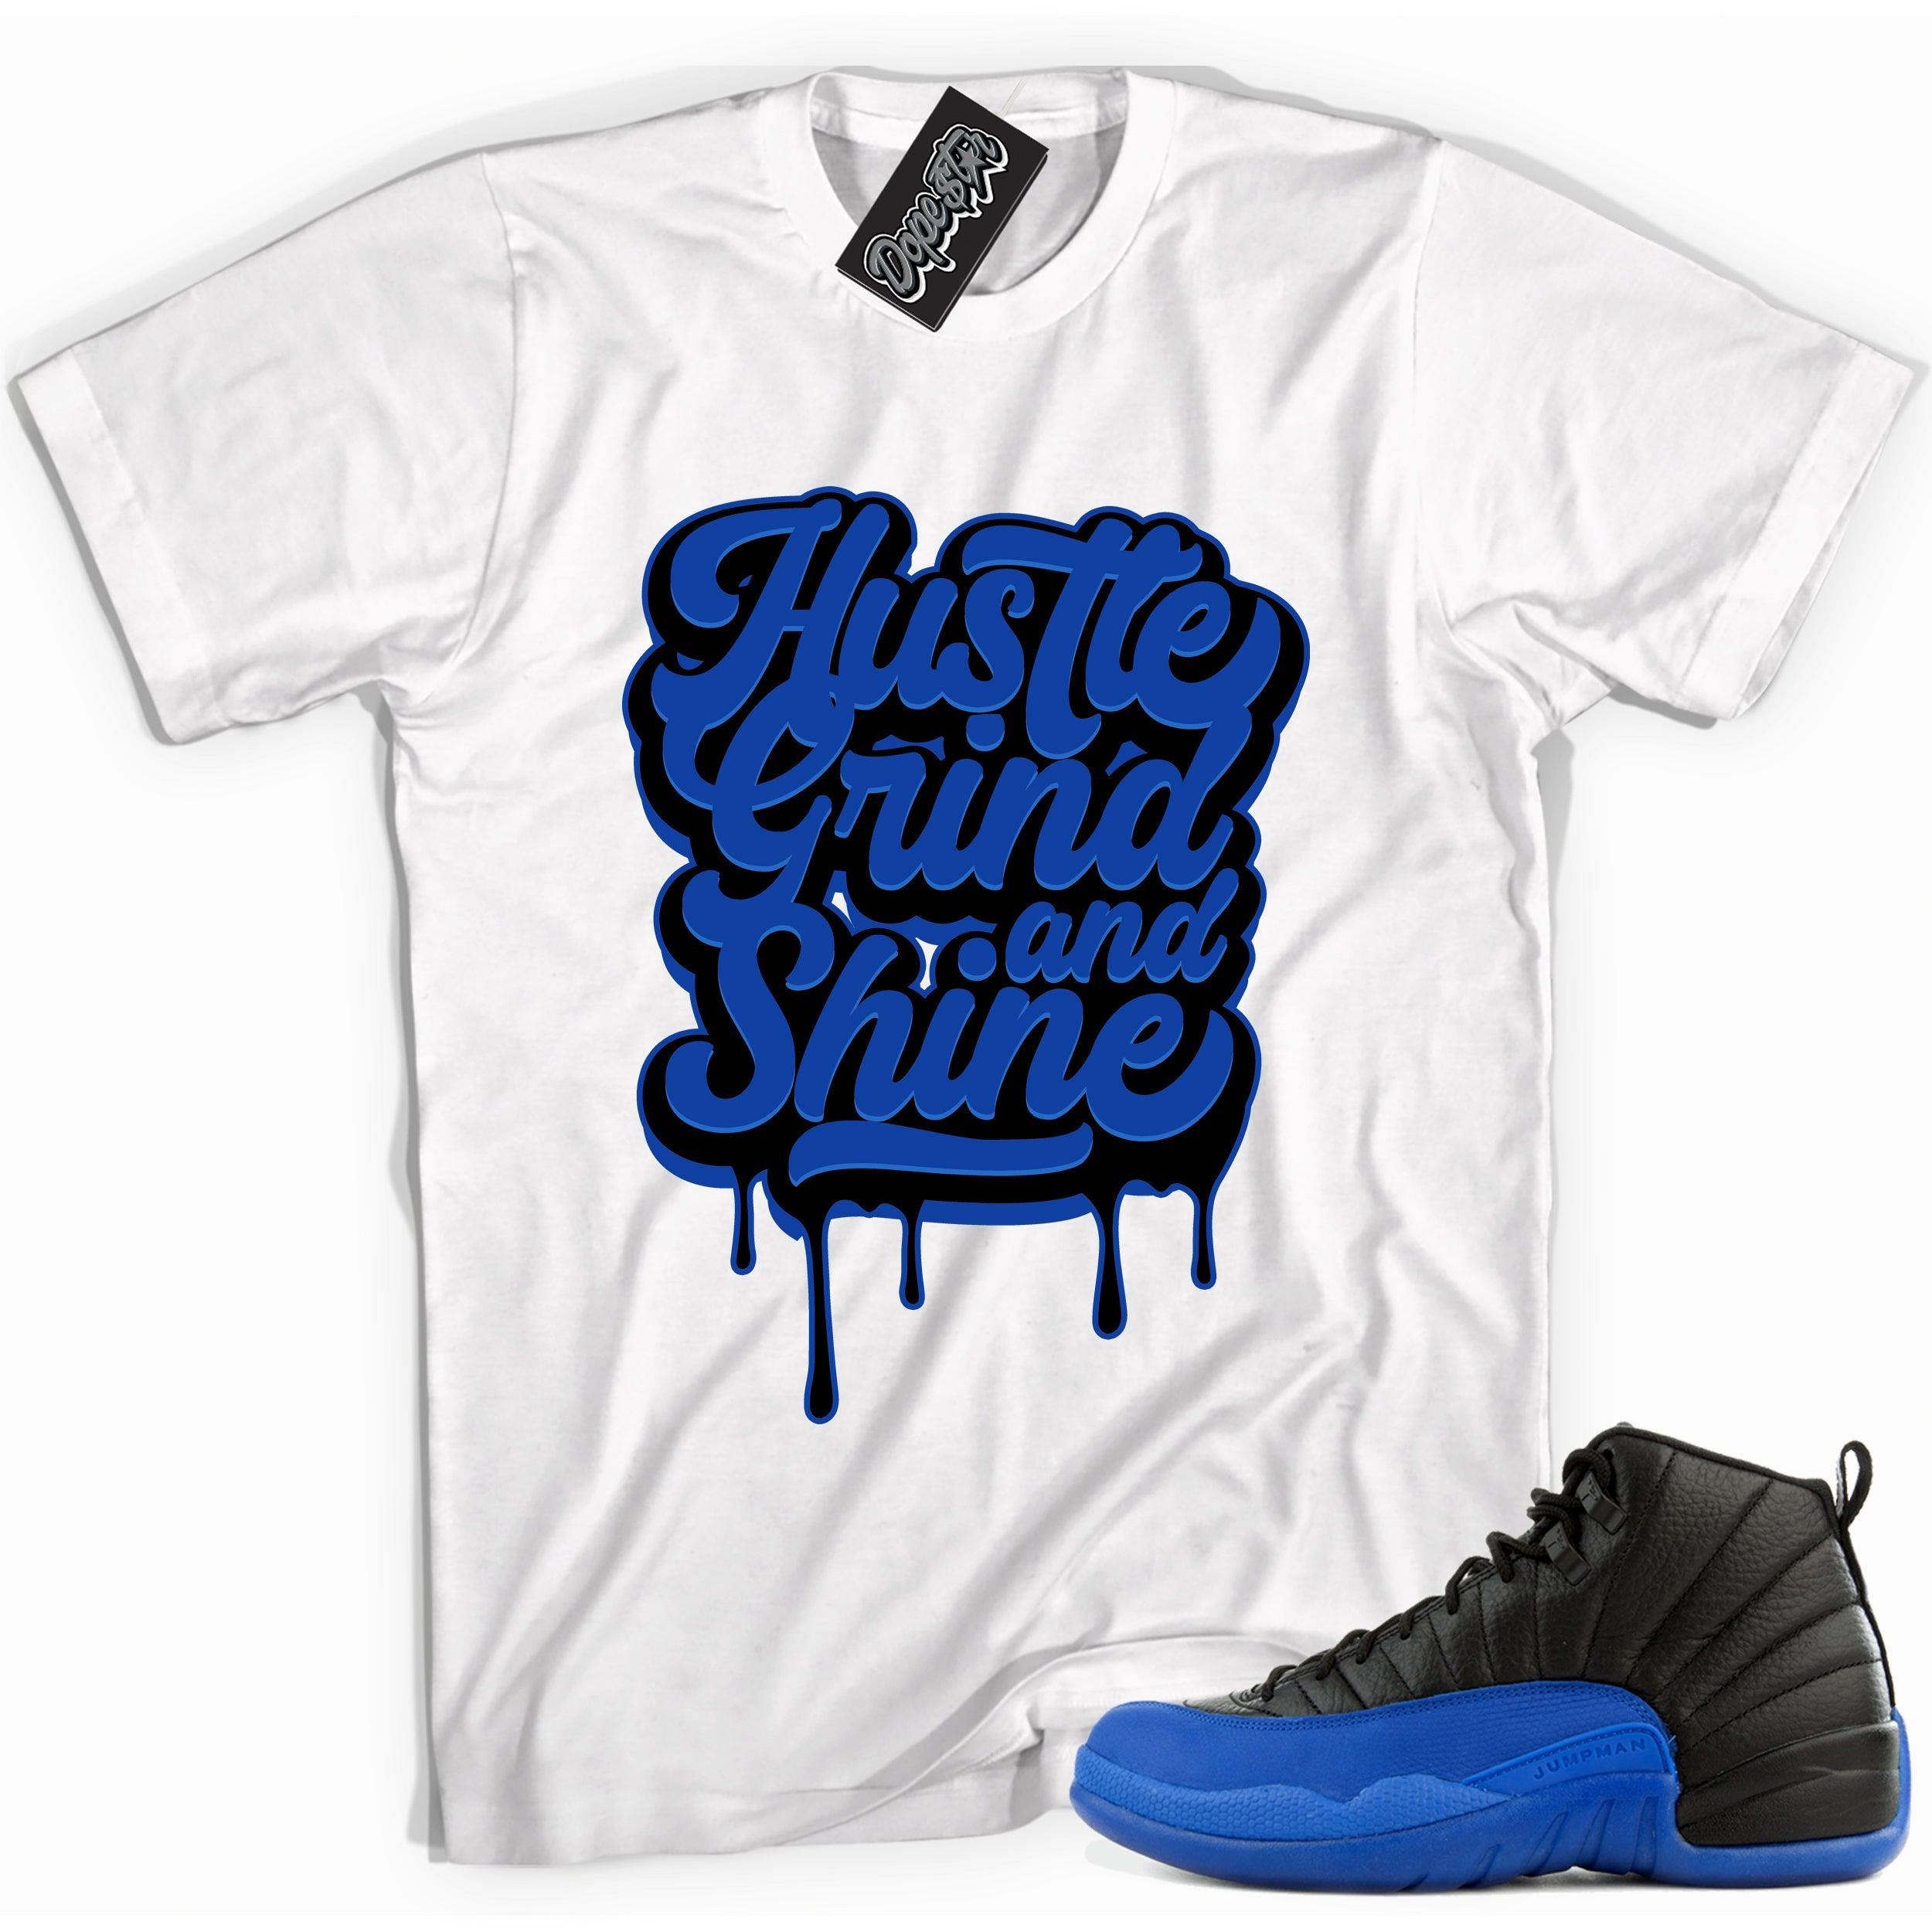 Cool white graphic tee with 'hustle grind shine' print, that perfectly matches Air Jordan 12 Retro Black Game Royal sneakers.